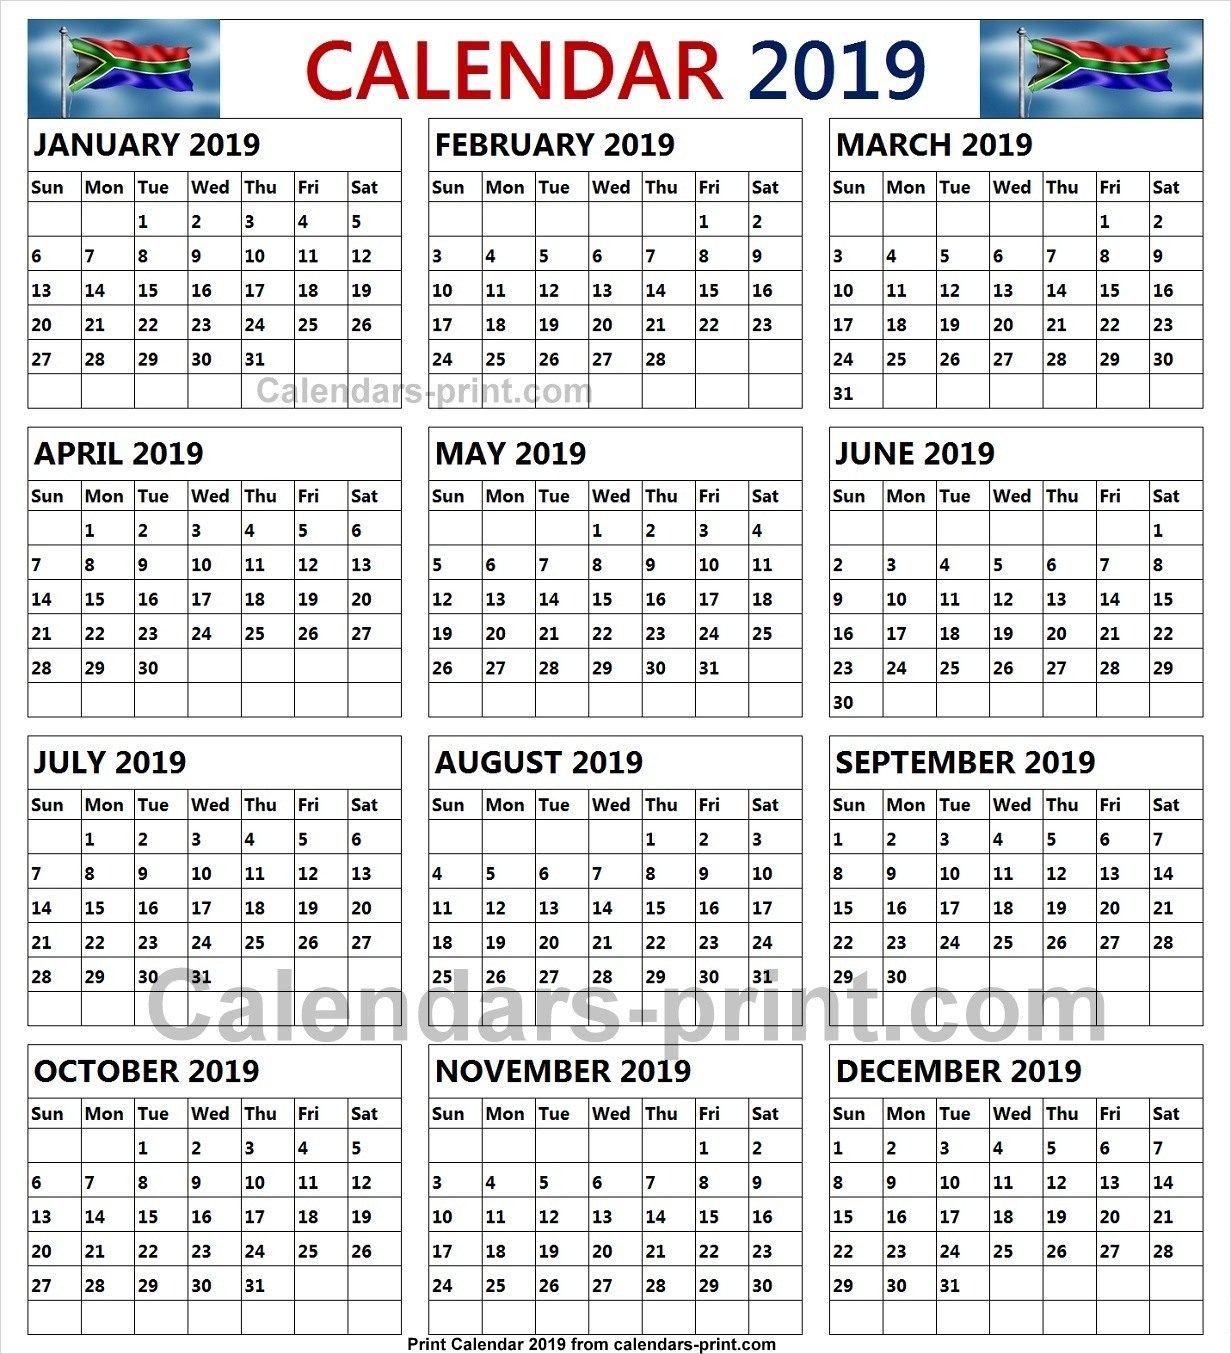 2019 South African School Holidays Archives - Calendar To Print School Calendar In South Africa 2019